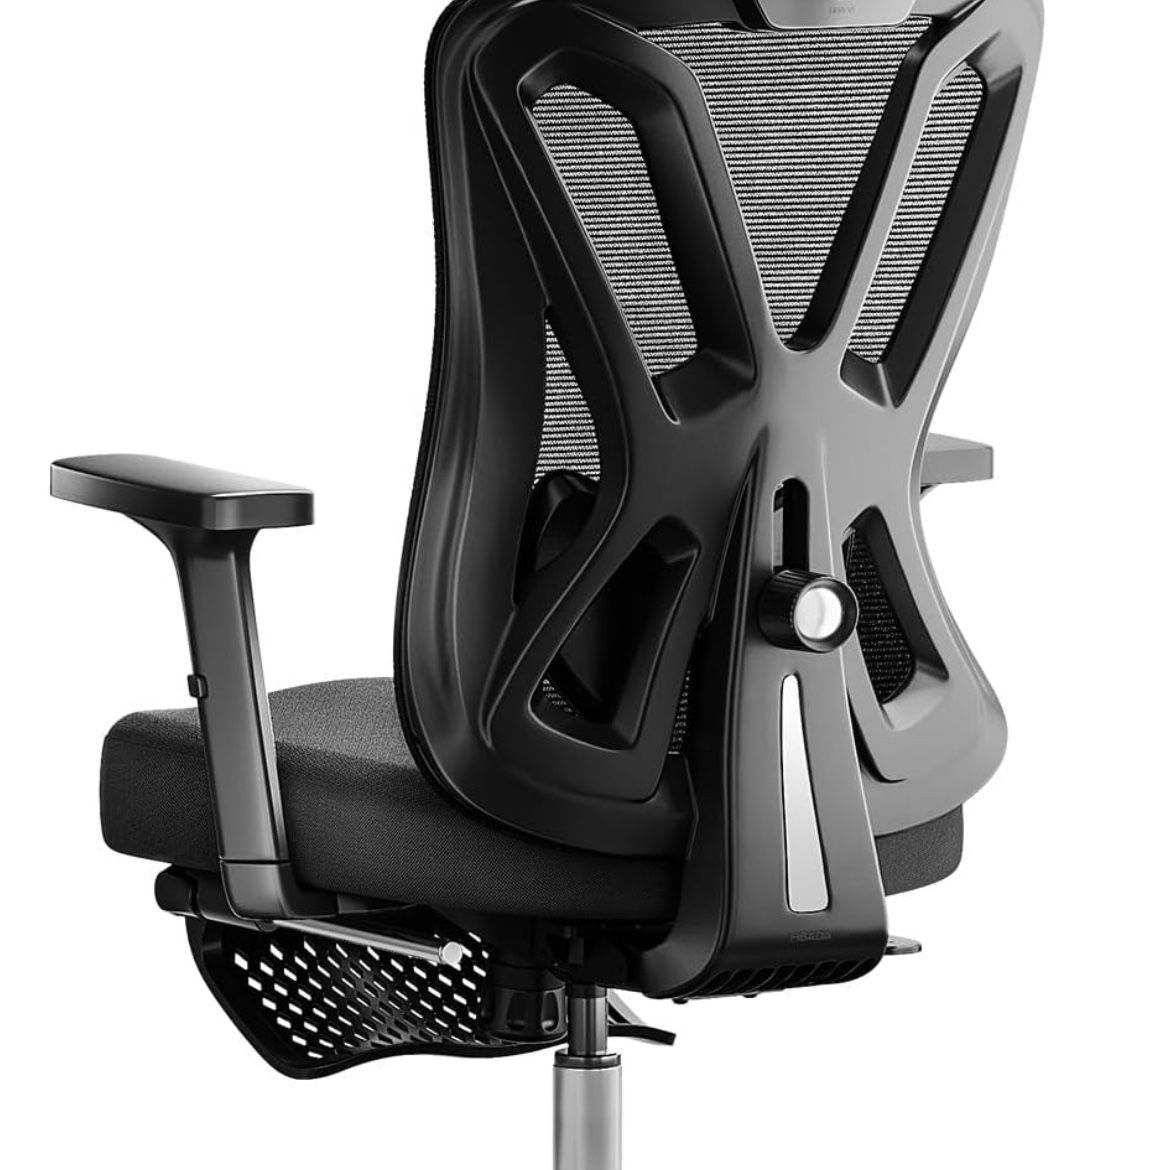 23-54 Hbada Ergonomic Office Chair, Desk Chair with Adjustable Lumbar Support and Height